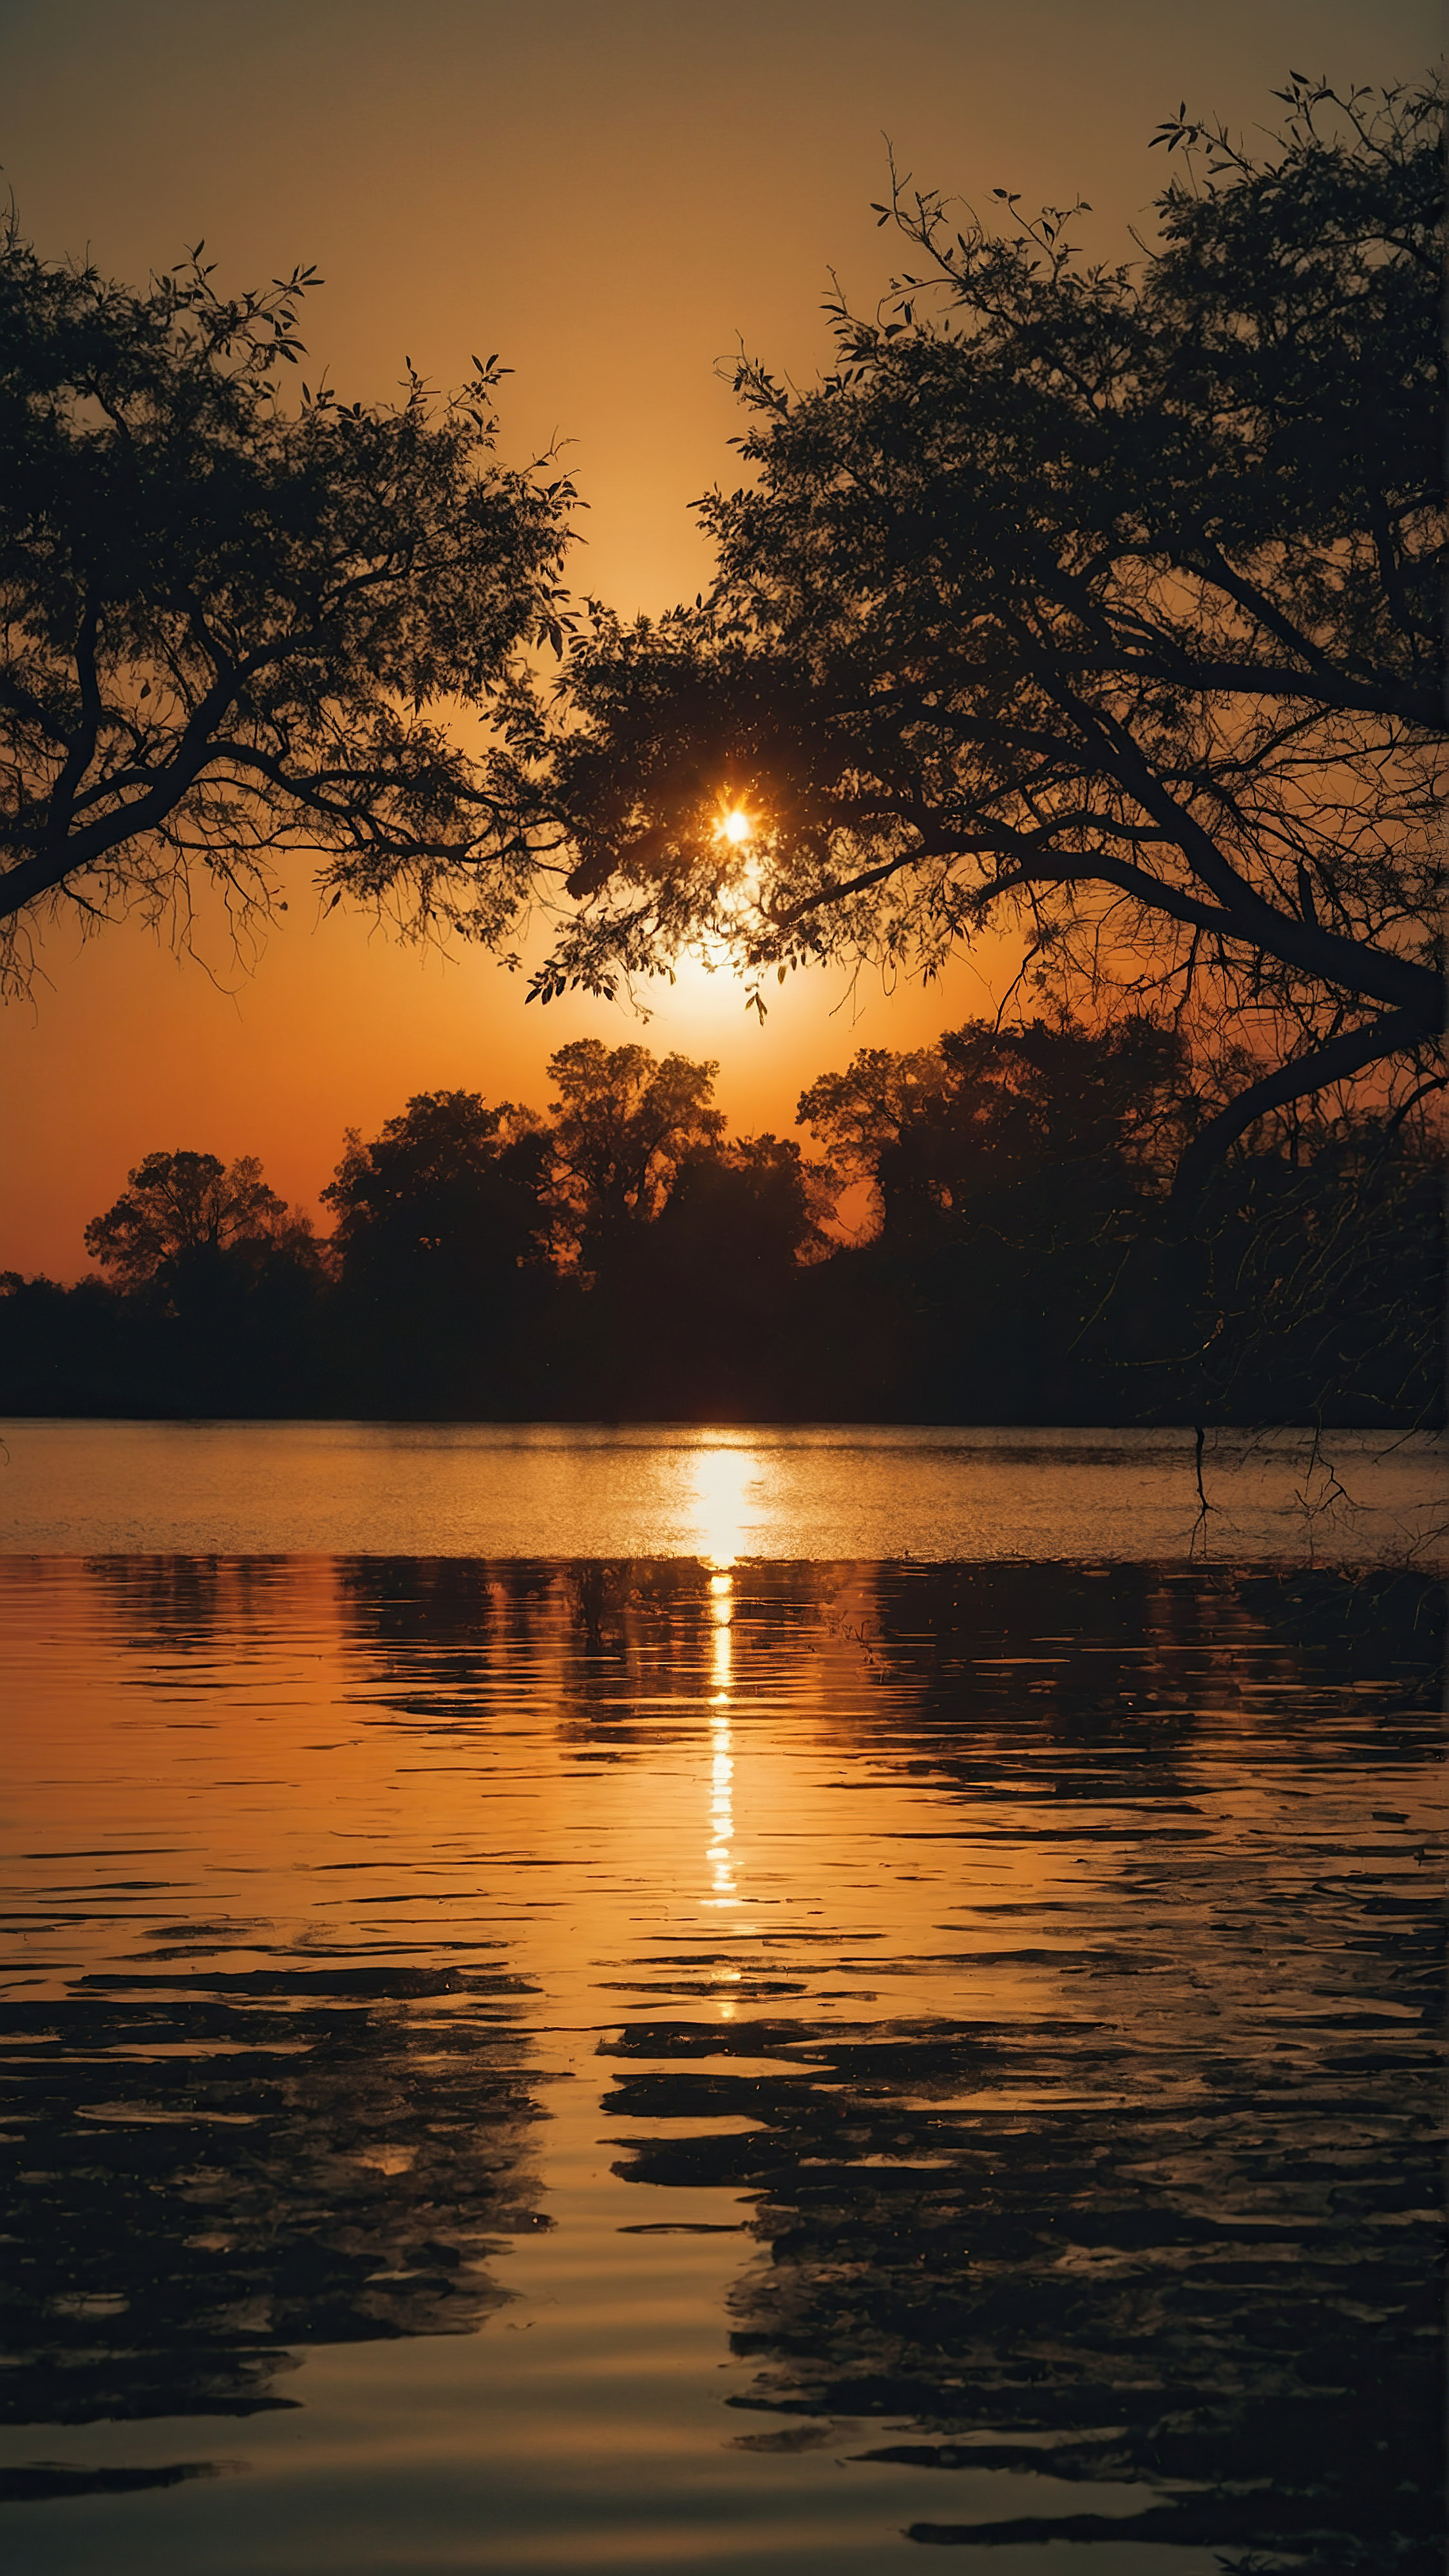 Enjoy the beauty and style of our HD wallpaper in 4K for iPhone, featuring a tranquil landscape at sunset with a glowing orange sun casting its warm hues across the scene, framed by silhouettes of tall, majestic trees with intricate branches.